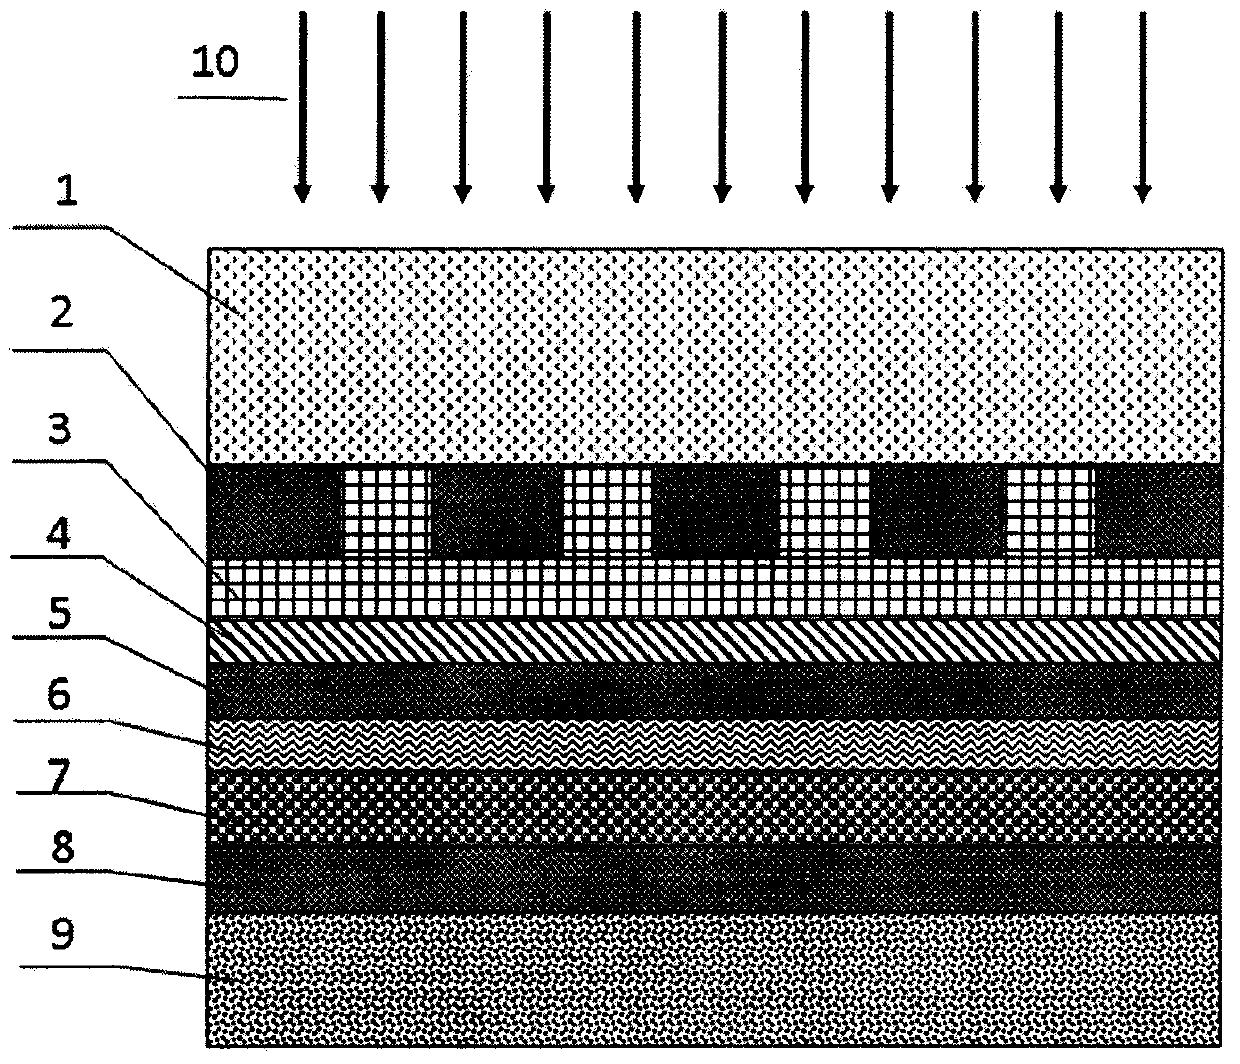 Immersive surface plasmon interference lithography method with adjustable resolution